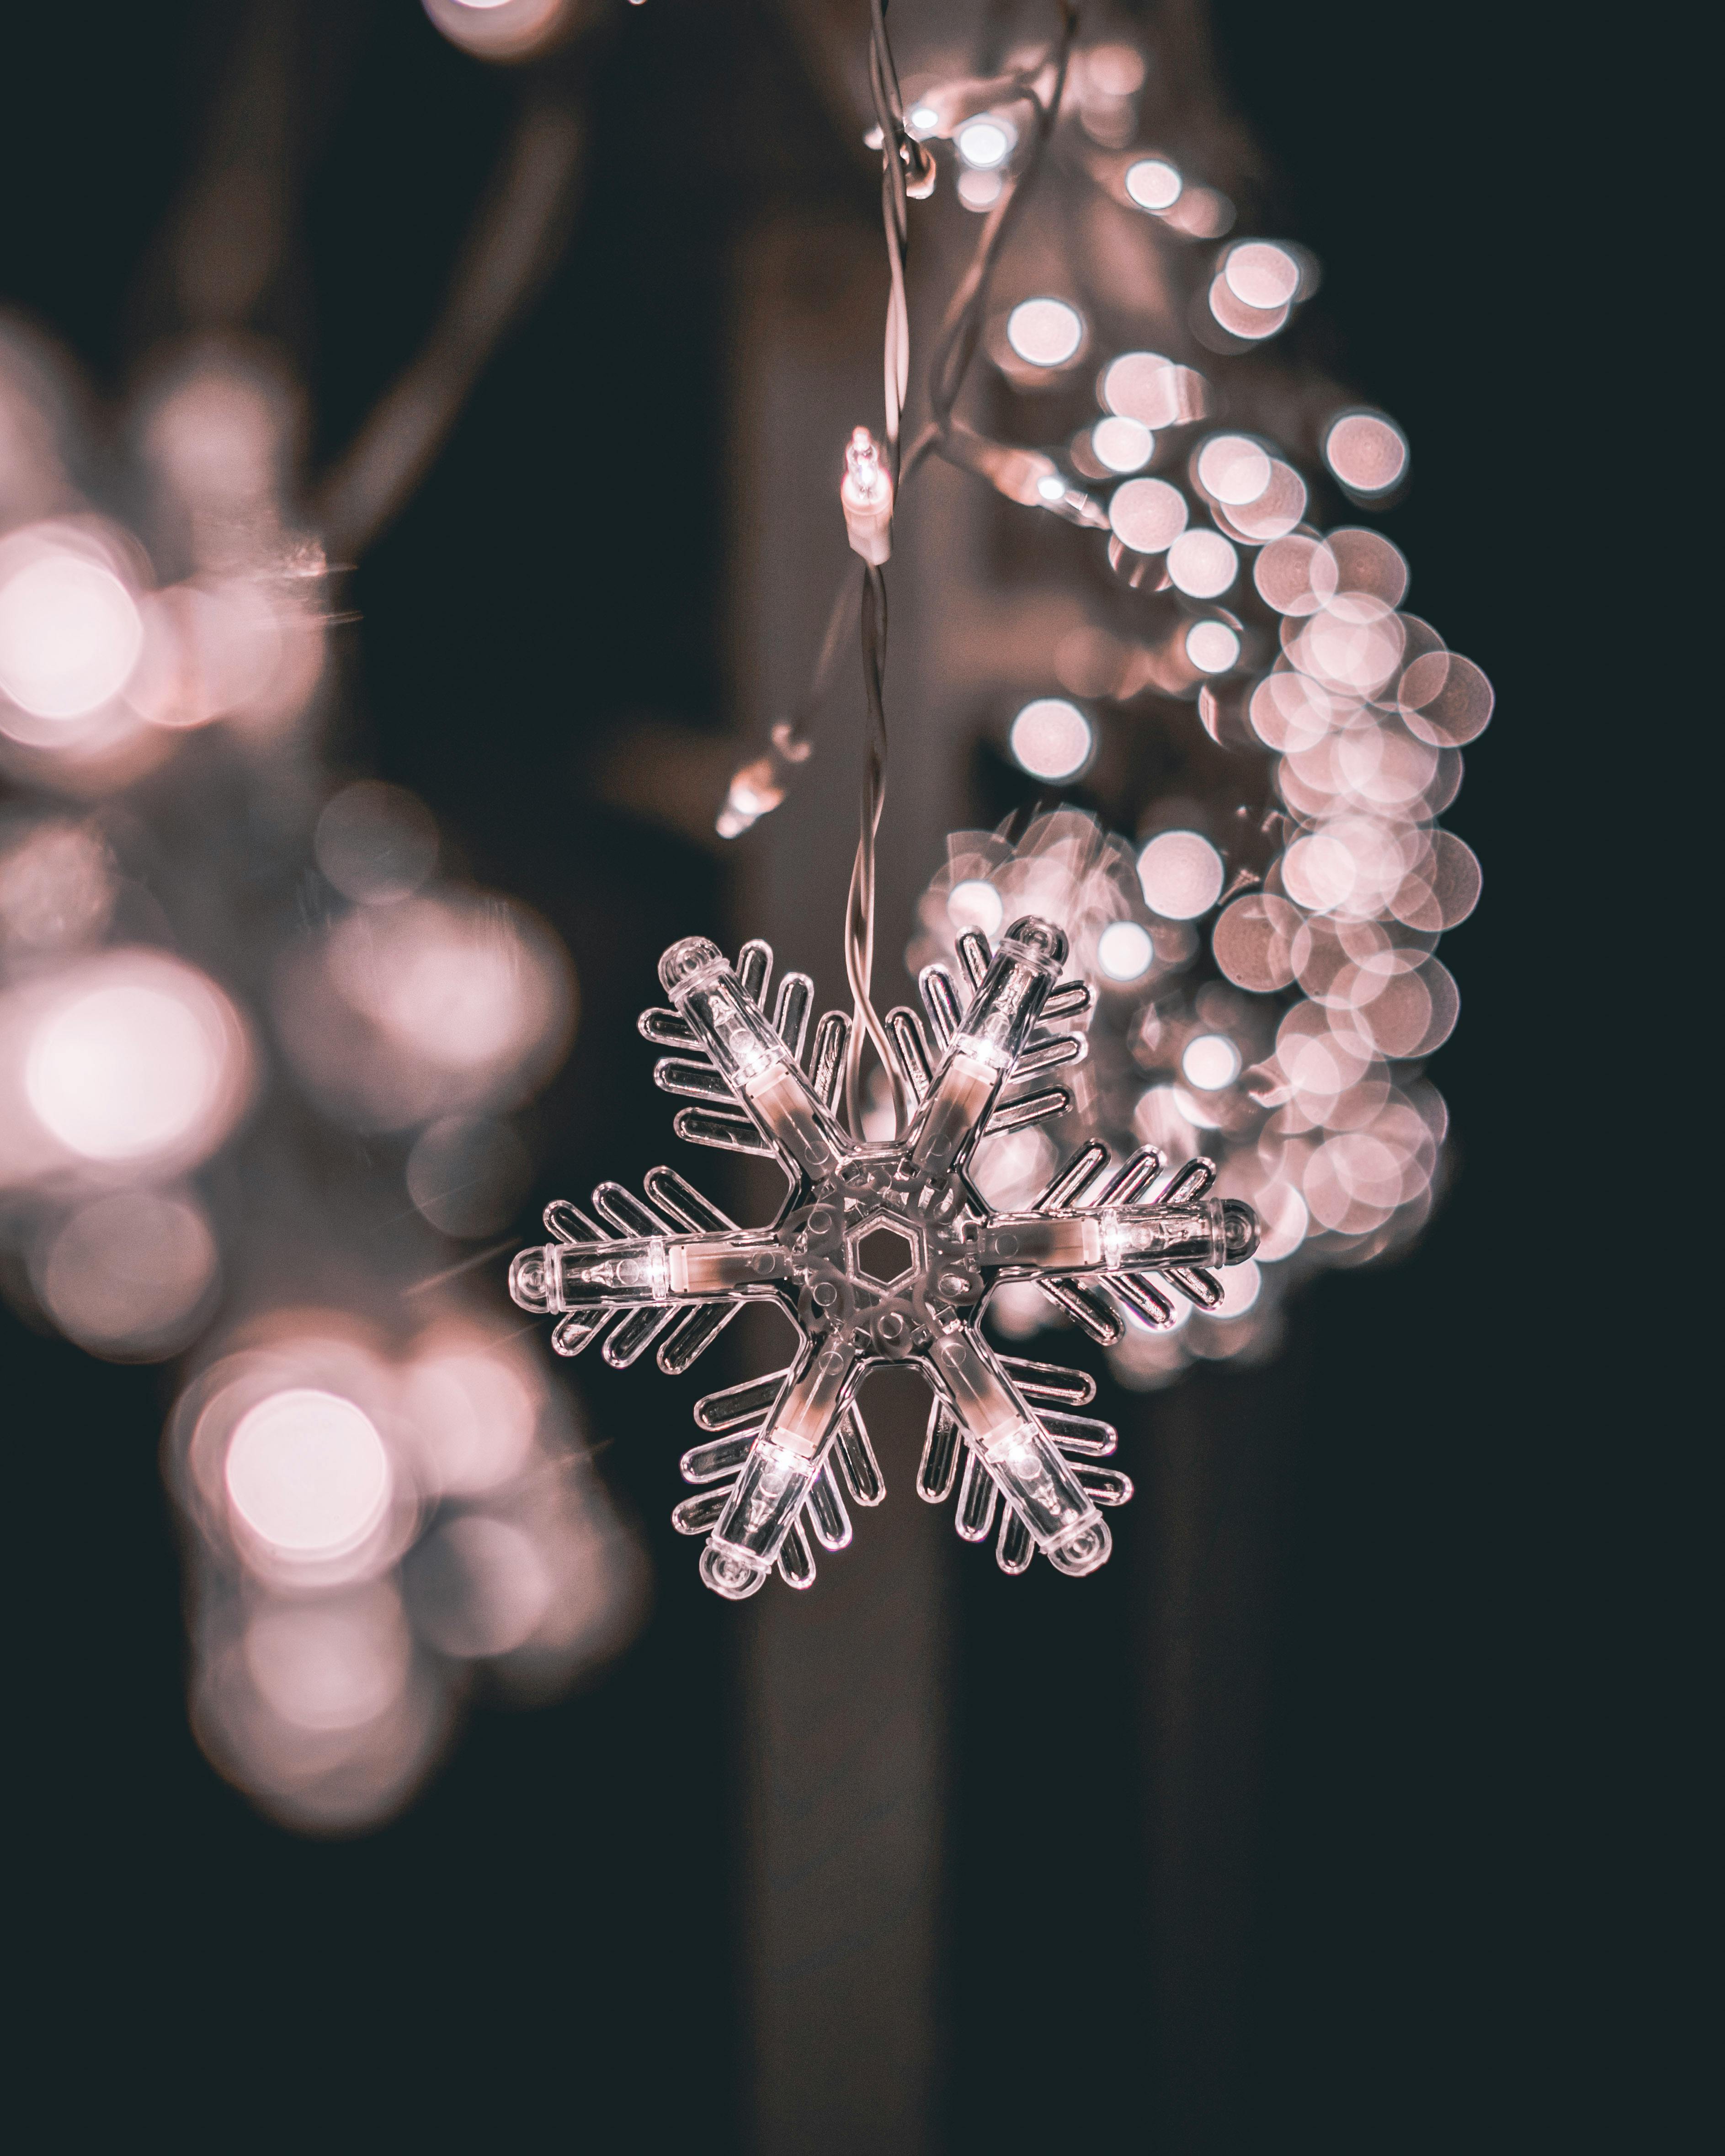 Fairy lights Images - Search Images on Everypixel